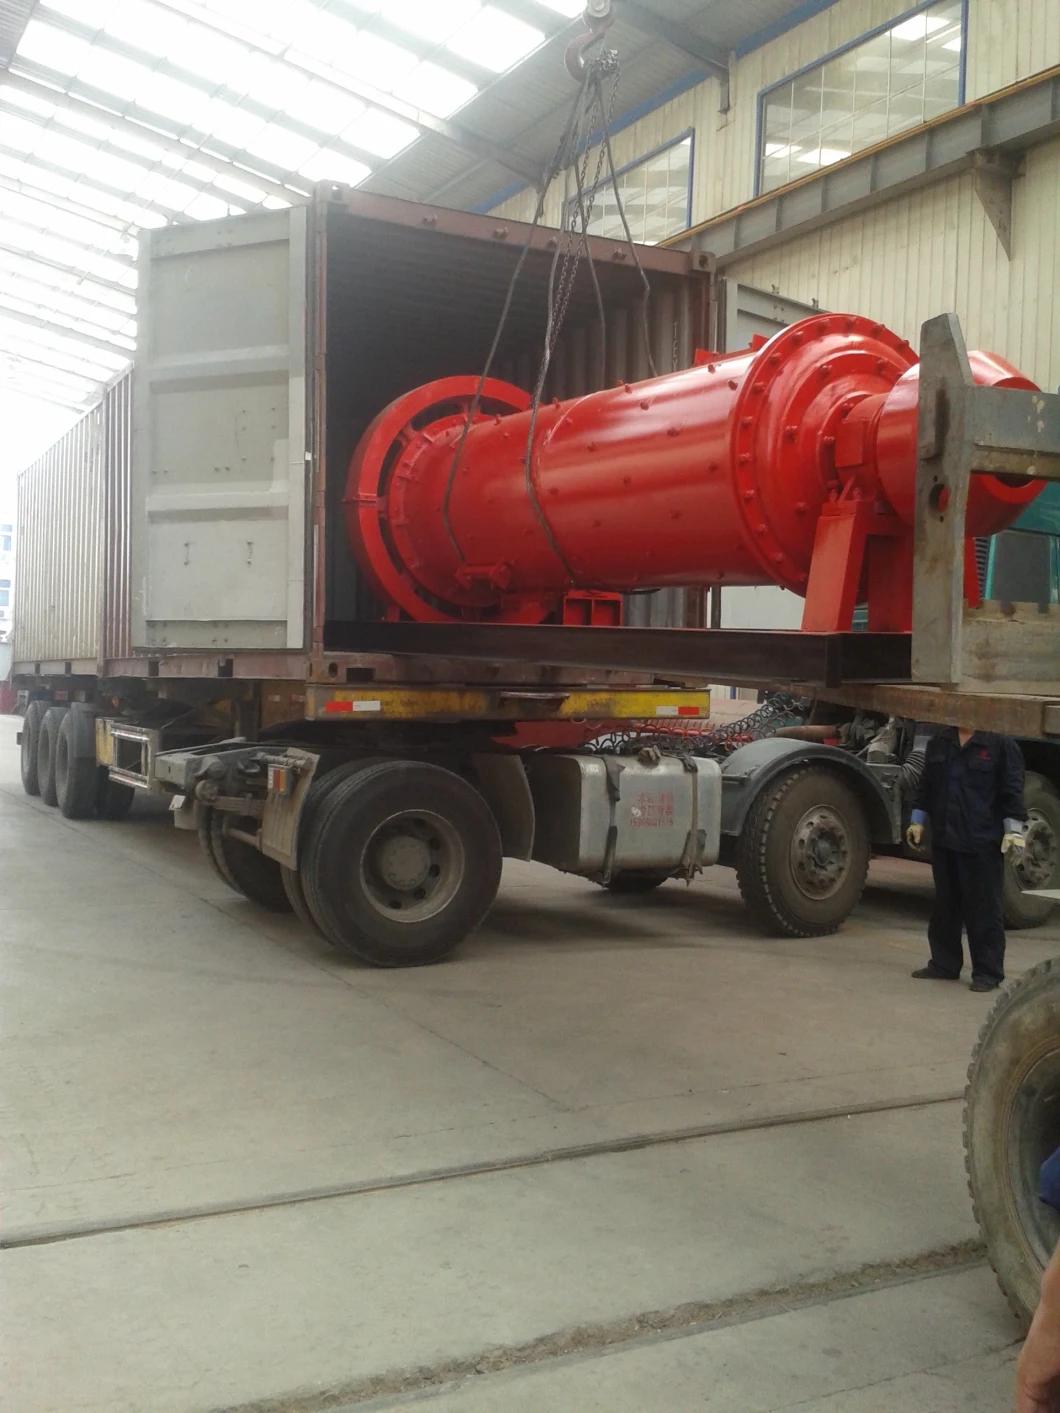 Cement Grinder Mq Series Ball Mill for Grinding in Mining